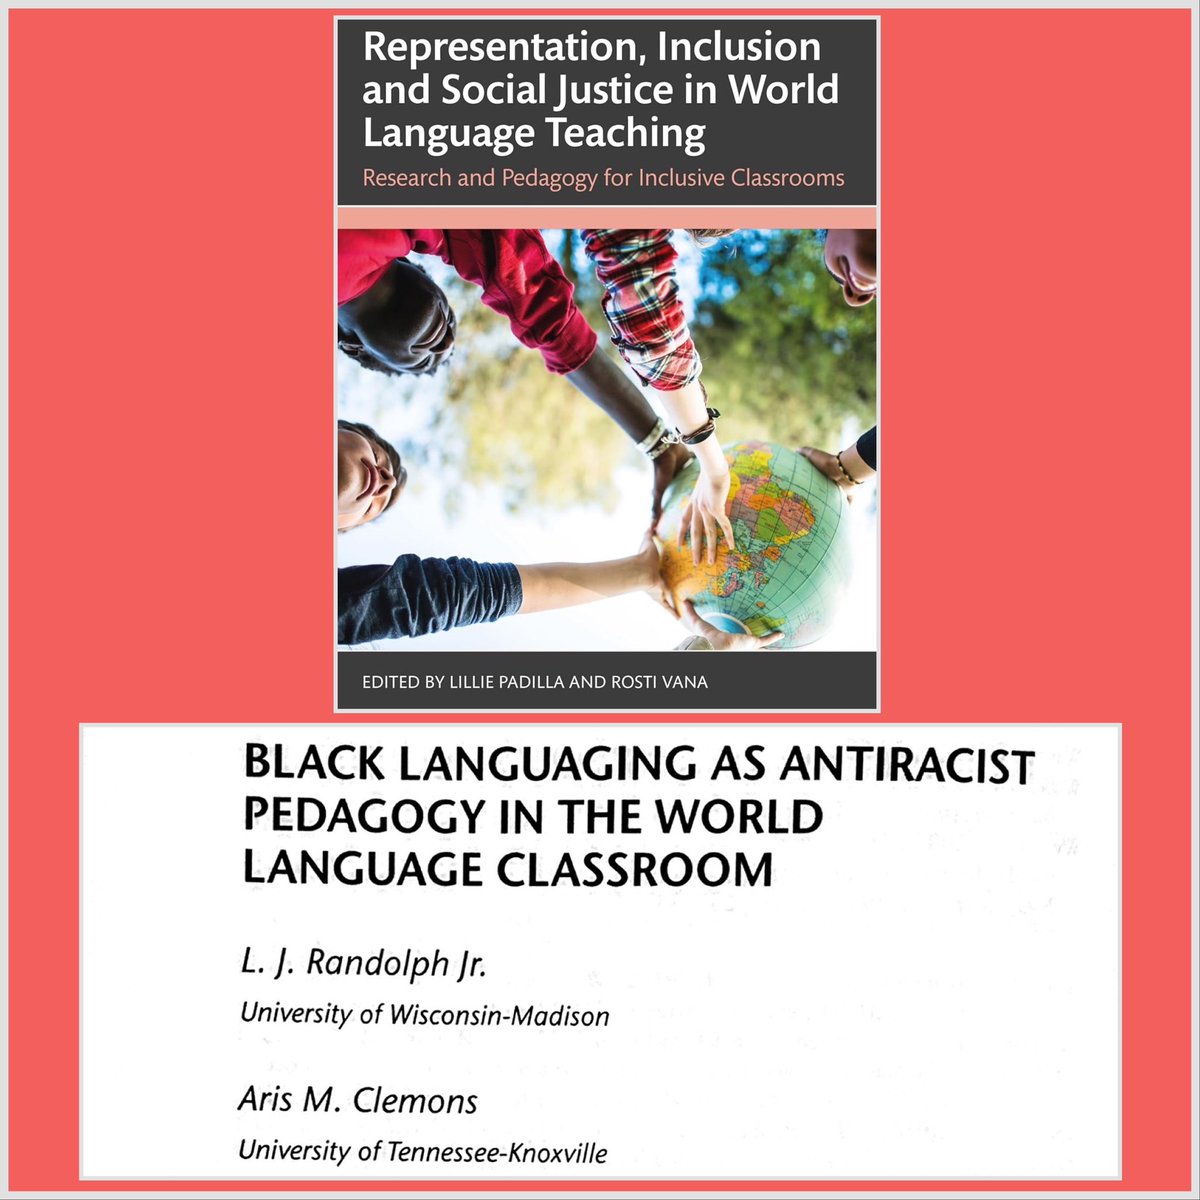 Very excited to have worked with the wonderful @ClemonsAris to contribute this chapter to Padilla and Vana’s edited volume Representation, Inclusion, and Social Justice in World Language Teaching ✊🏾